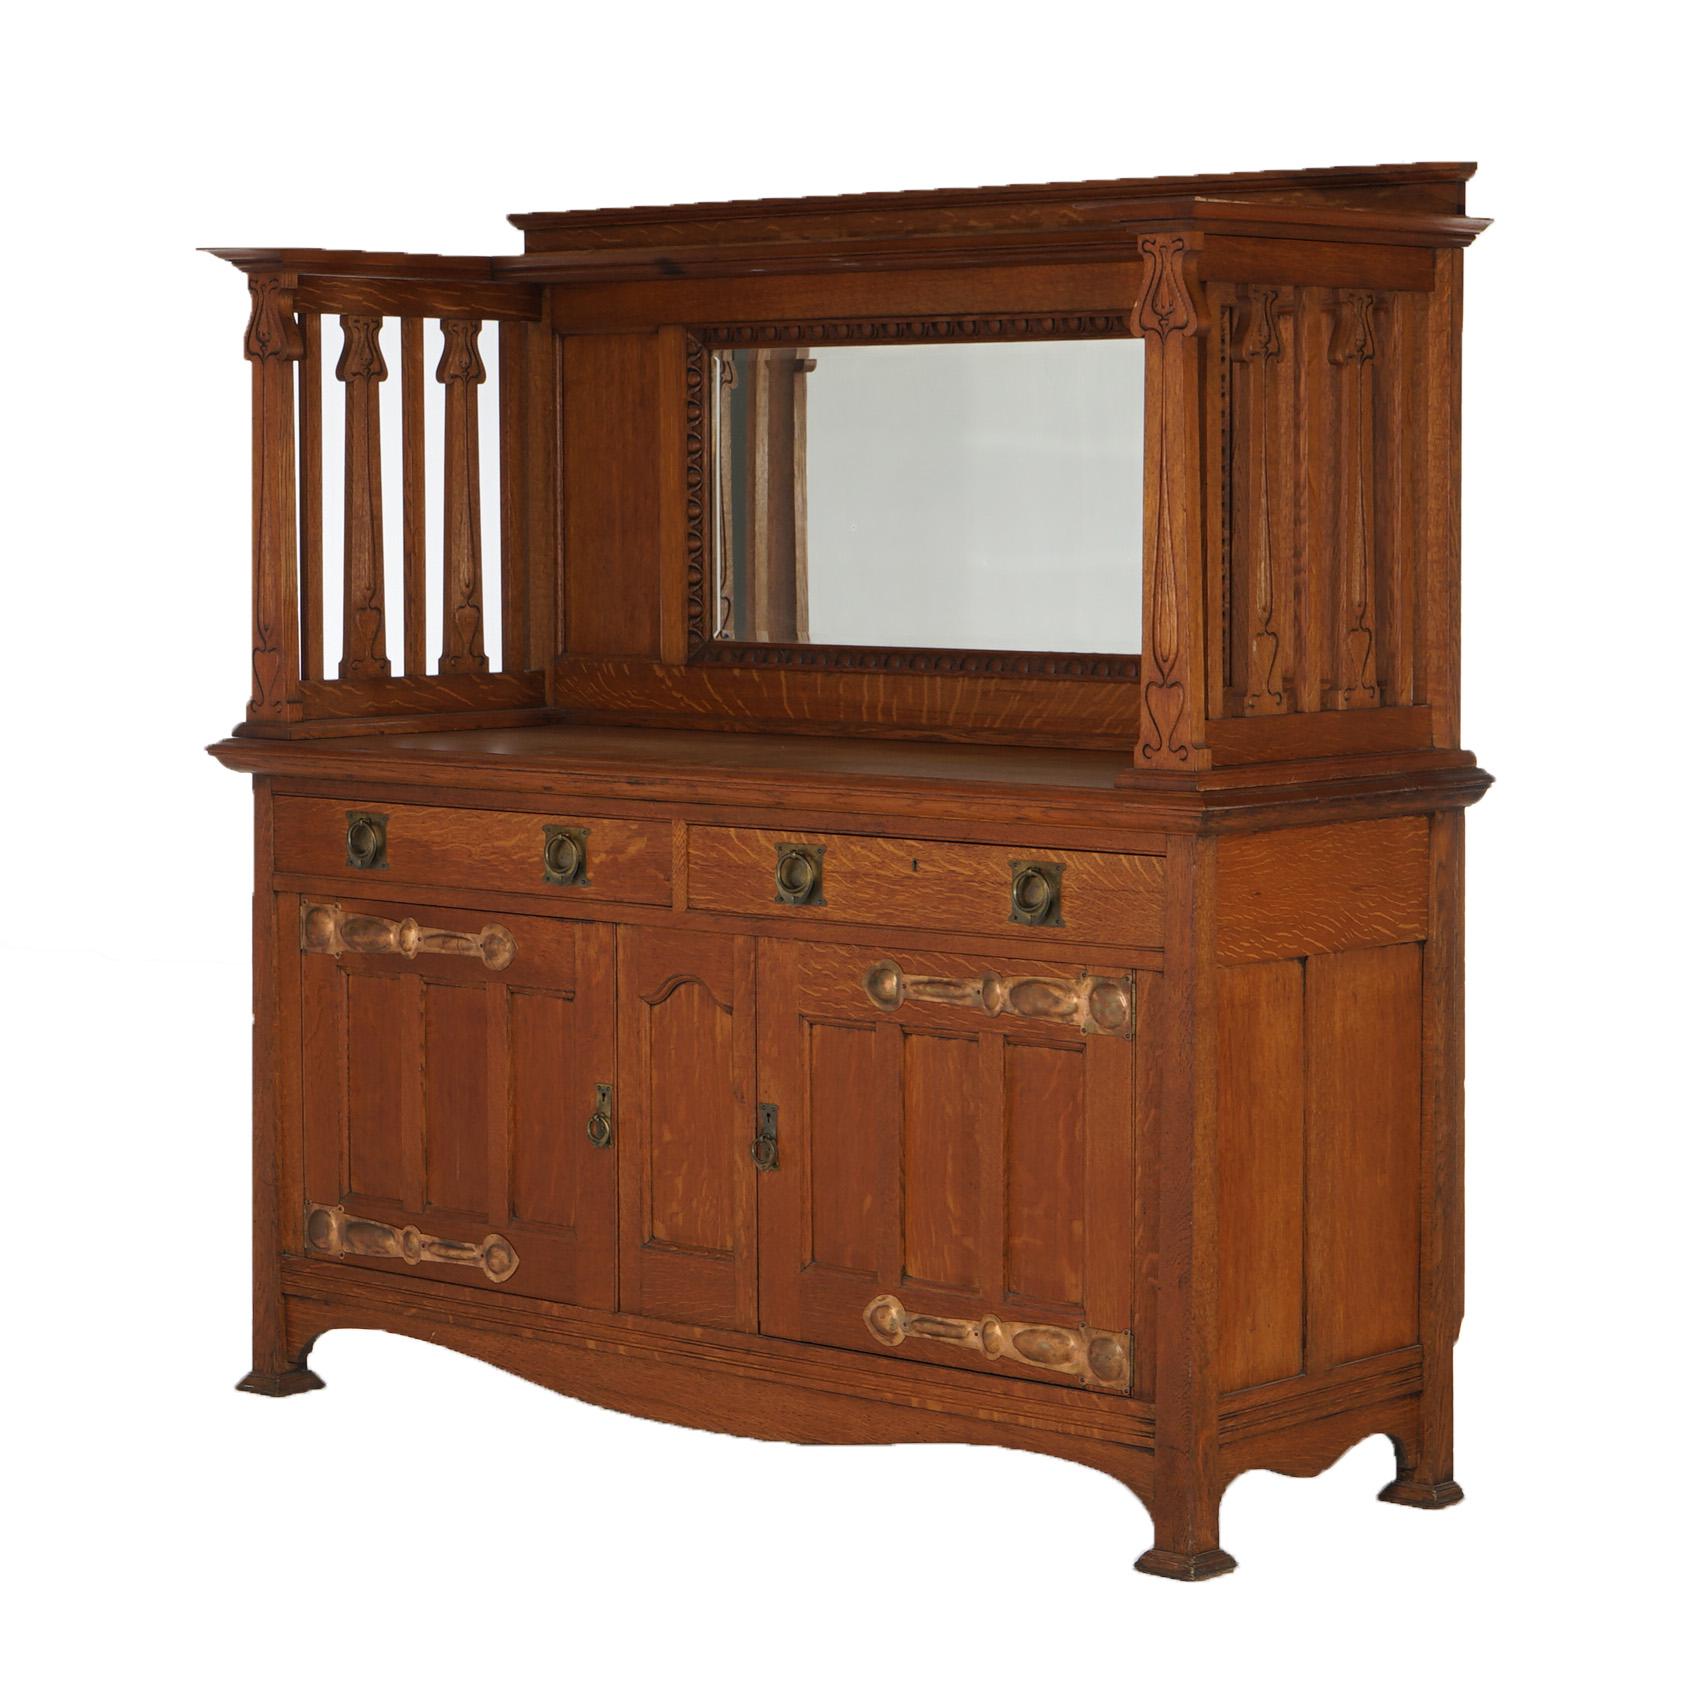 Antique English Arts & Crafts Liberty & Co. Oak Sideboard With Mirror C1910 For Sale 4